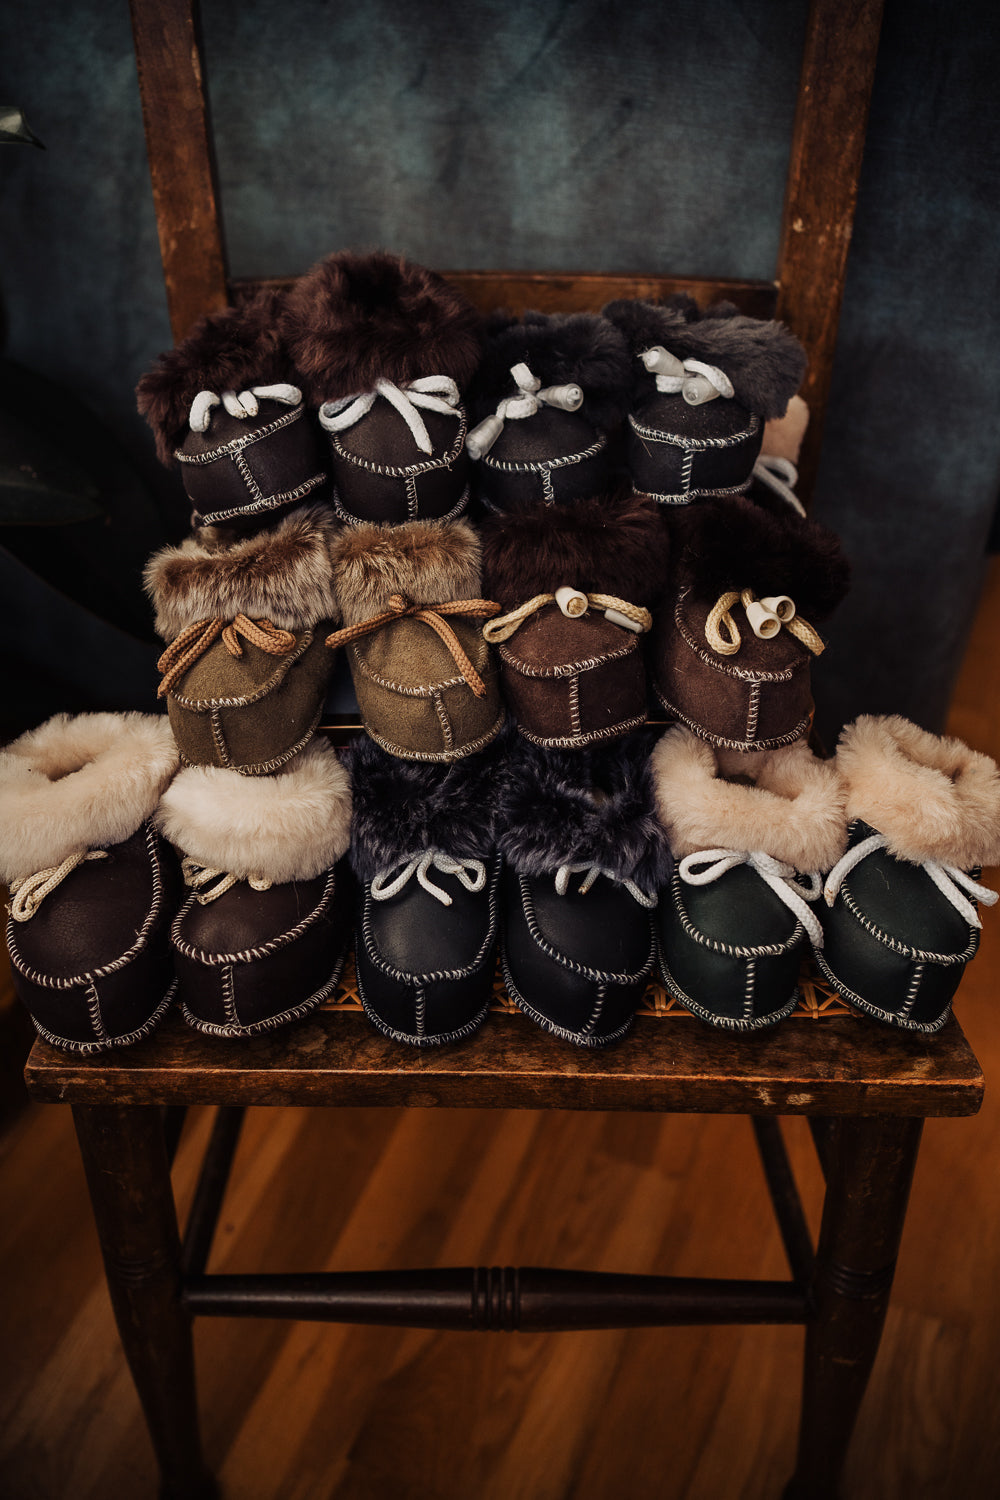 Baby and newborn footwear baby booties in dark brown or black colour wit the sheepskin cuff, Natural leather product